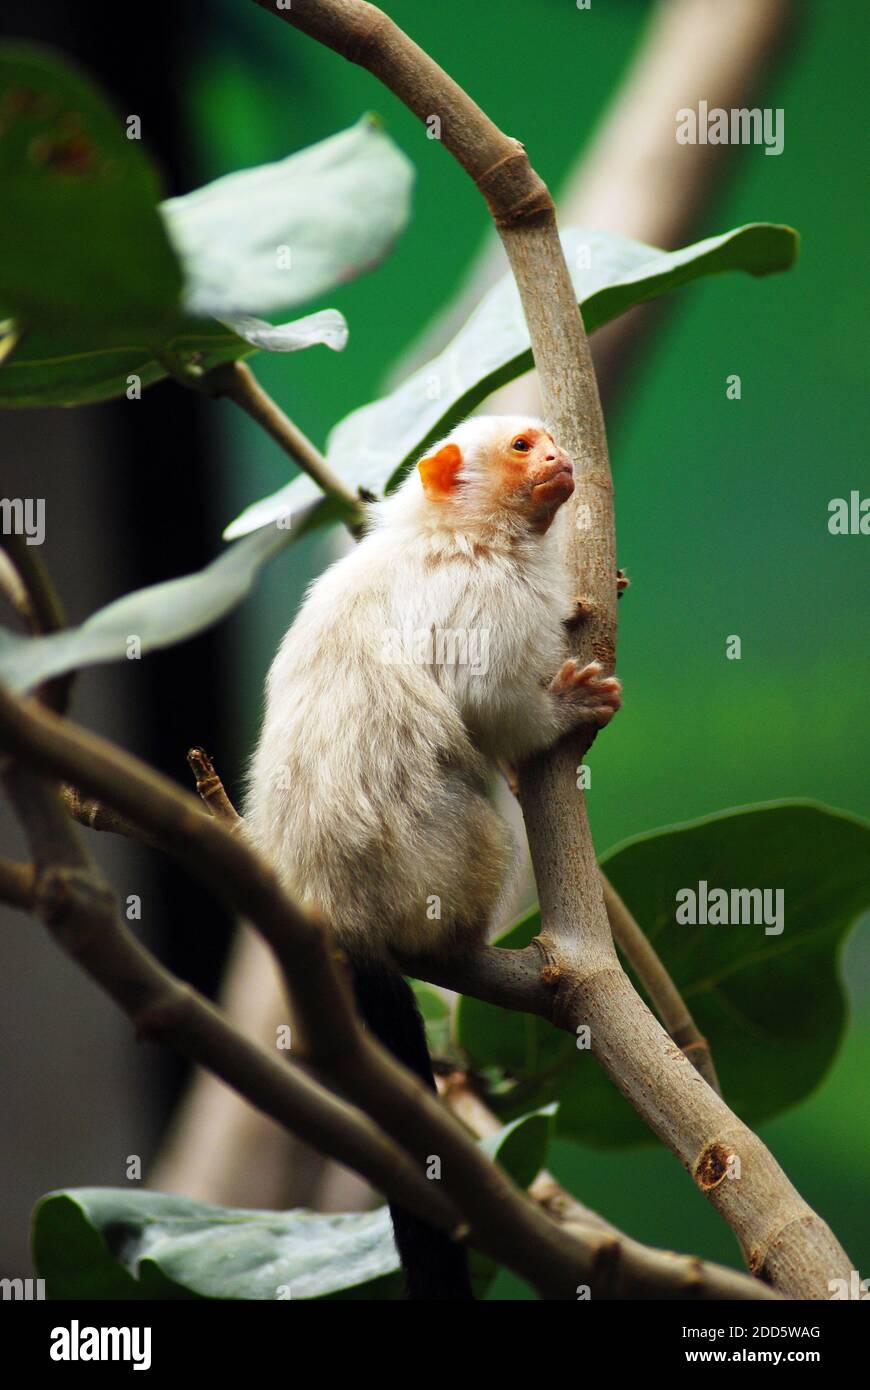 Silvery marmoset (Mico argentatus) is a New World monkey that lives in the eastern Amazon Rainforest in Brazil. Remarkable are its flesh-colored ears. Stock Photo